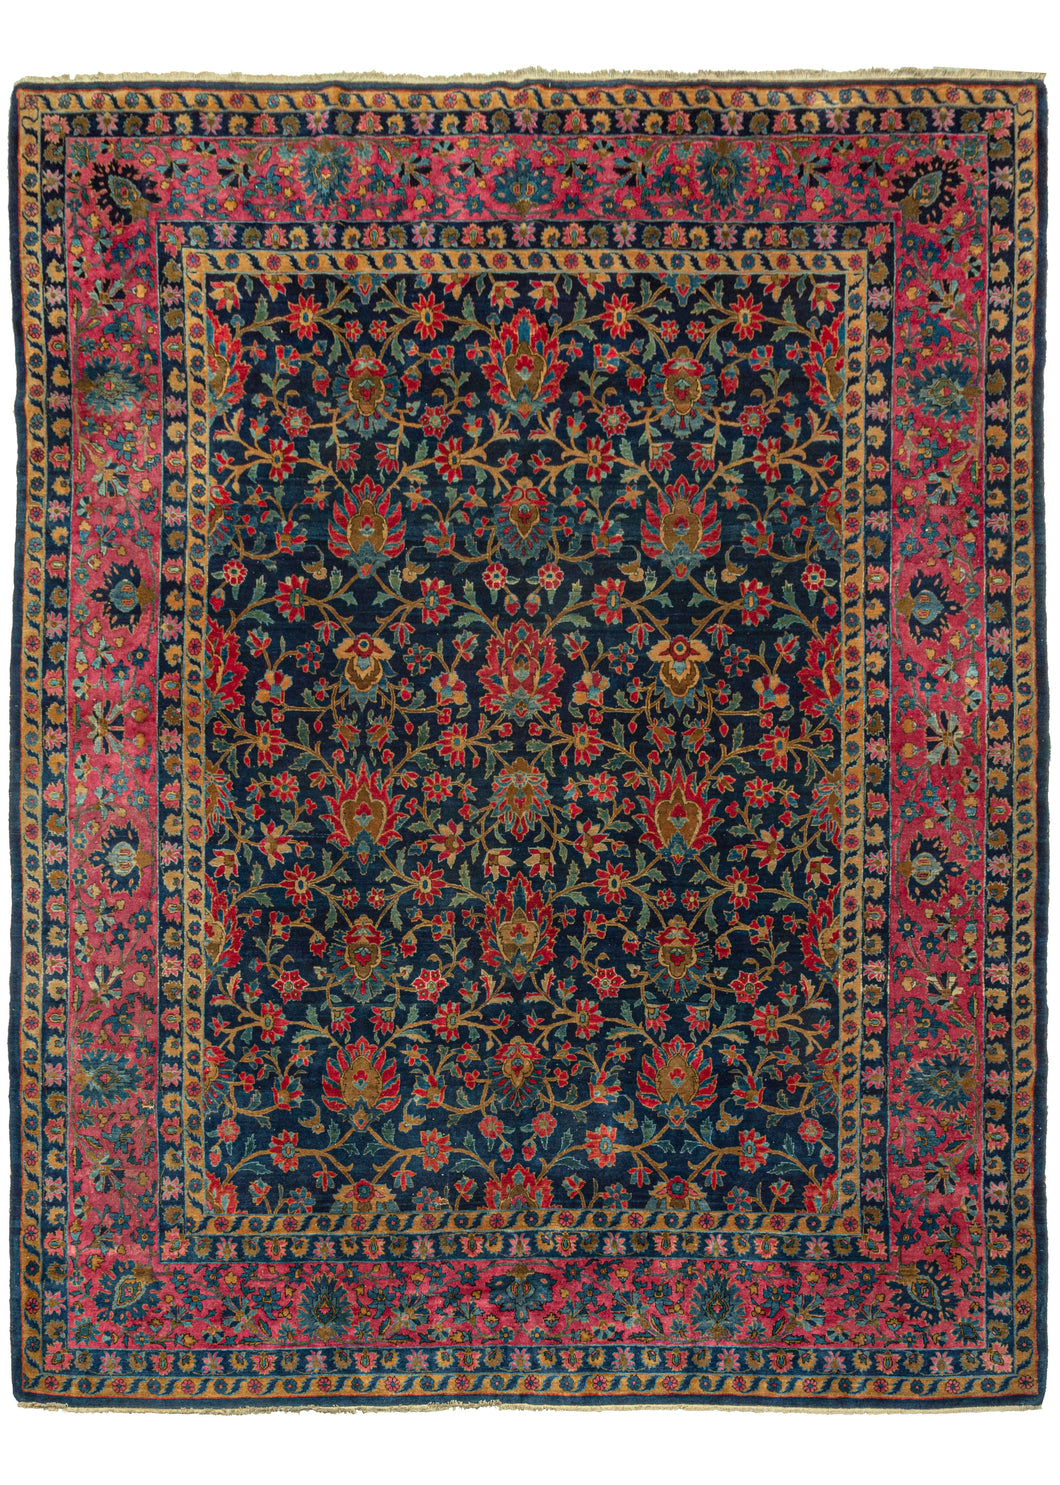 This Luxurious Manchester Keshan Rug features a curvilinear floral motif in rich reds with soft brown branches and lively green leaves on an inky blue ground. It is framed by a perfectly reconciled palmette border with a variety of wonderful blues on a soft pink ground. The composition has been finely executed with silky 